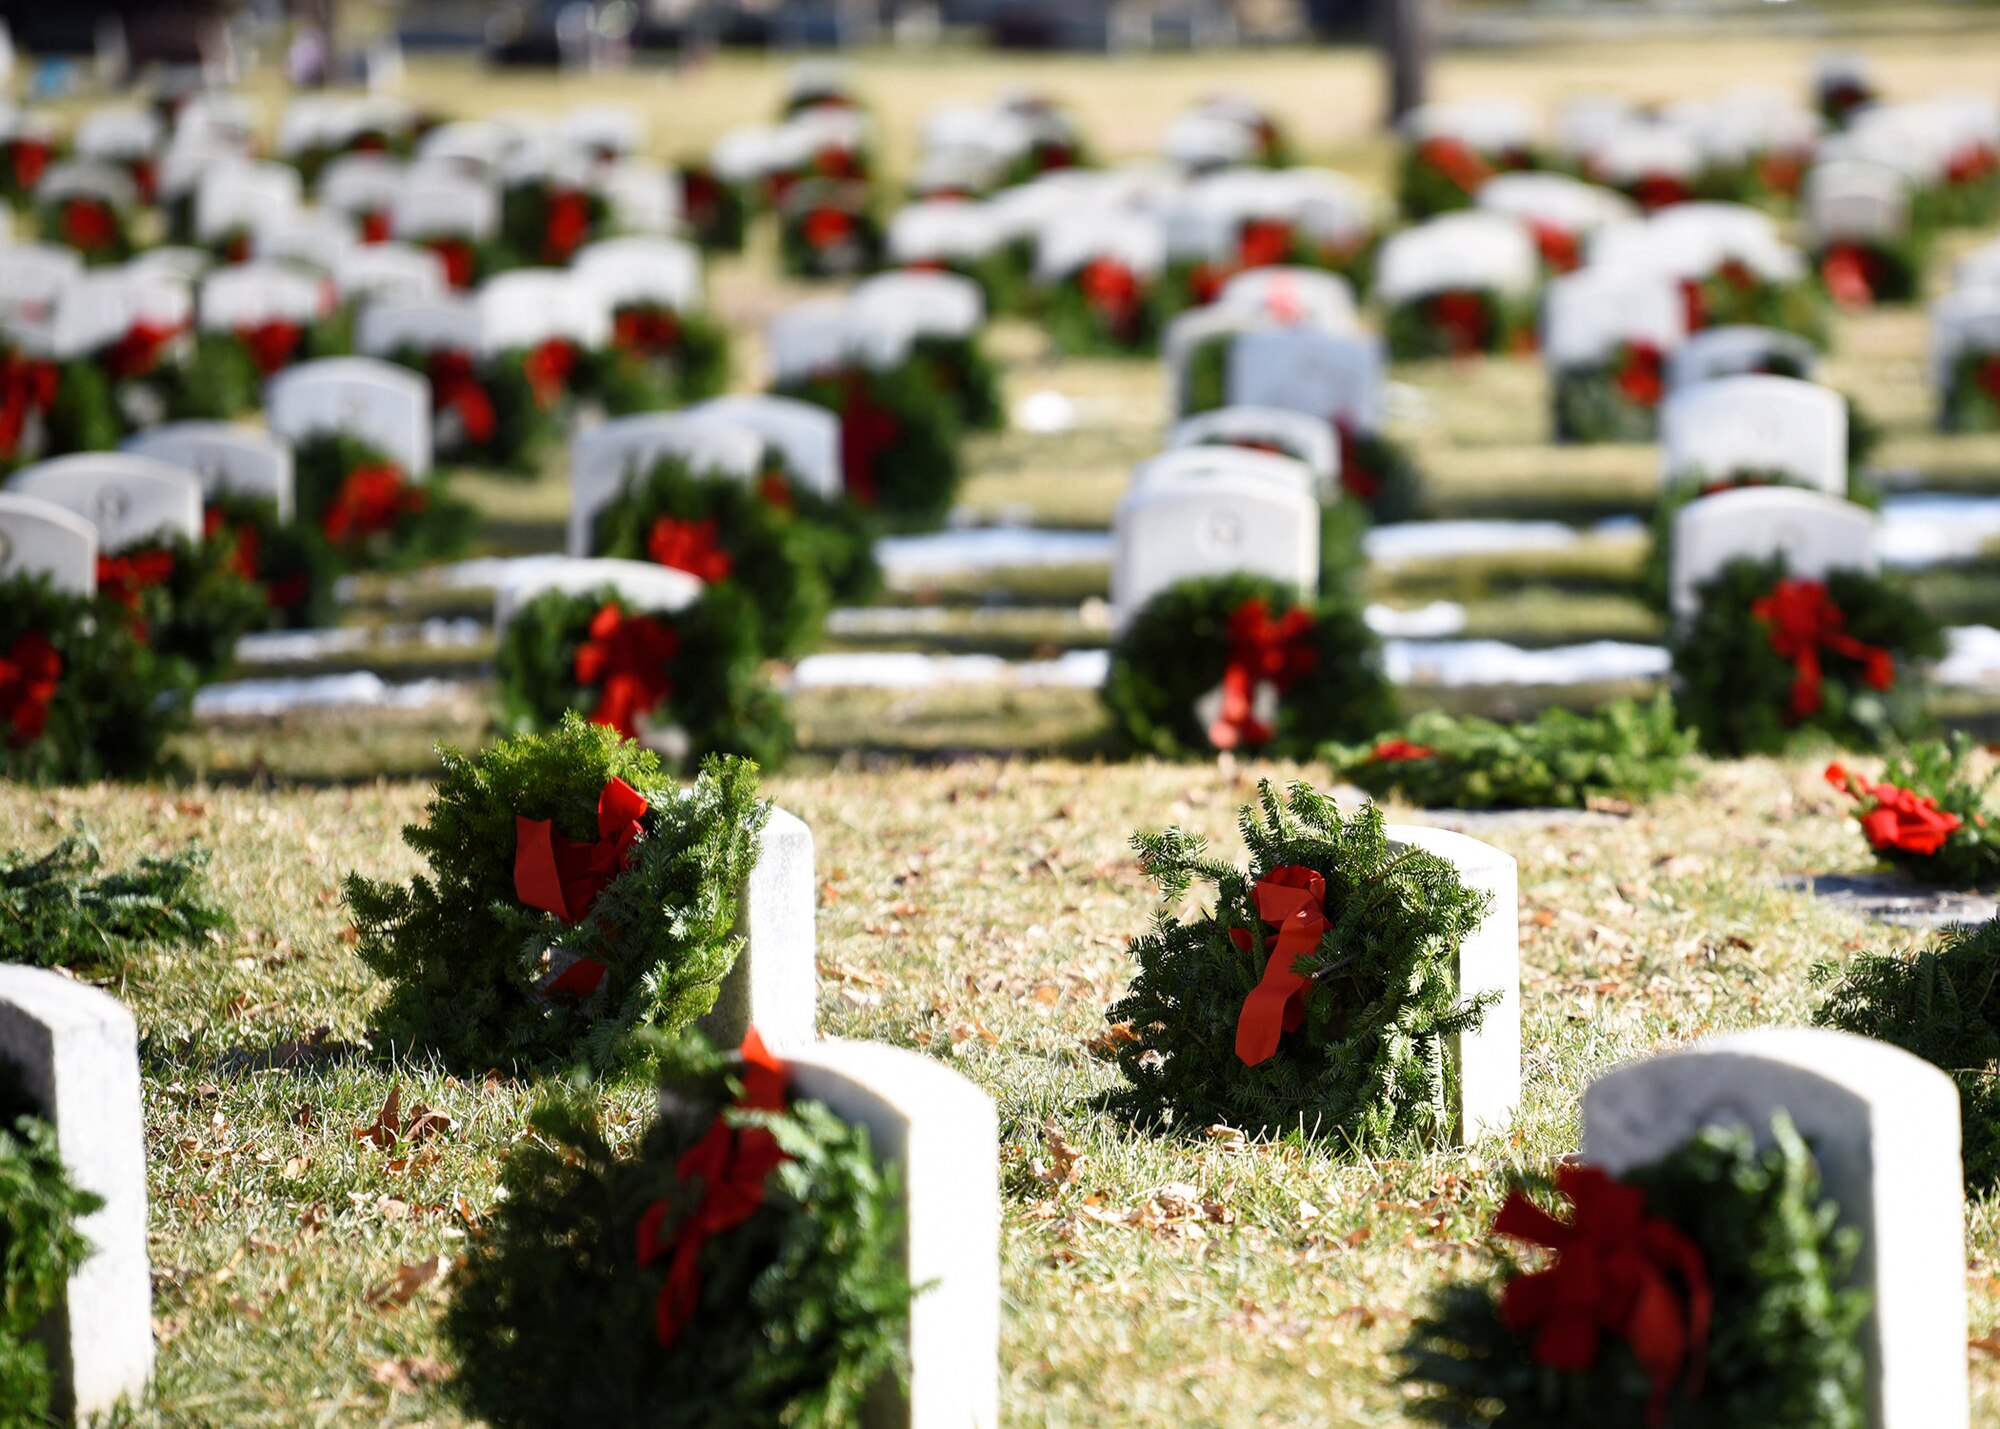 Wreaths are placed on the graves of departed veterans at Fairmount Cemetery in Denver, Dec. 14, 2019.